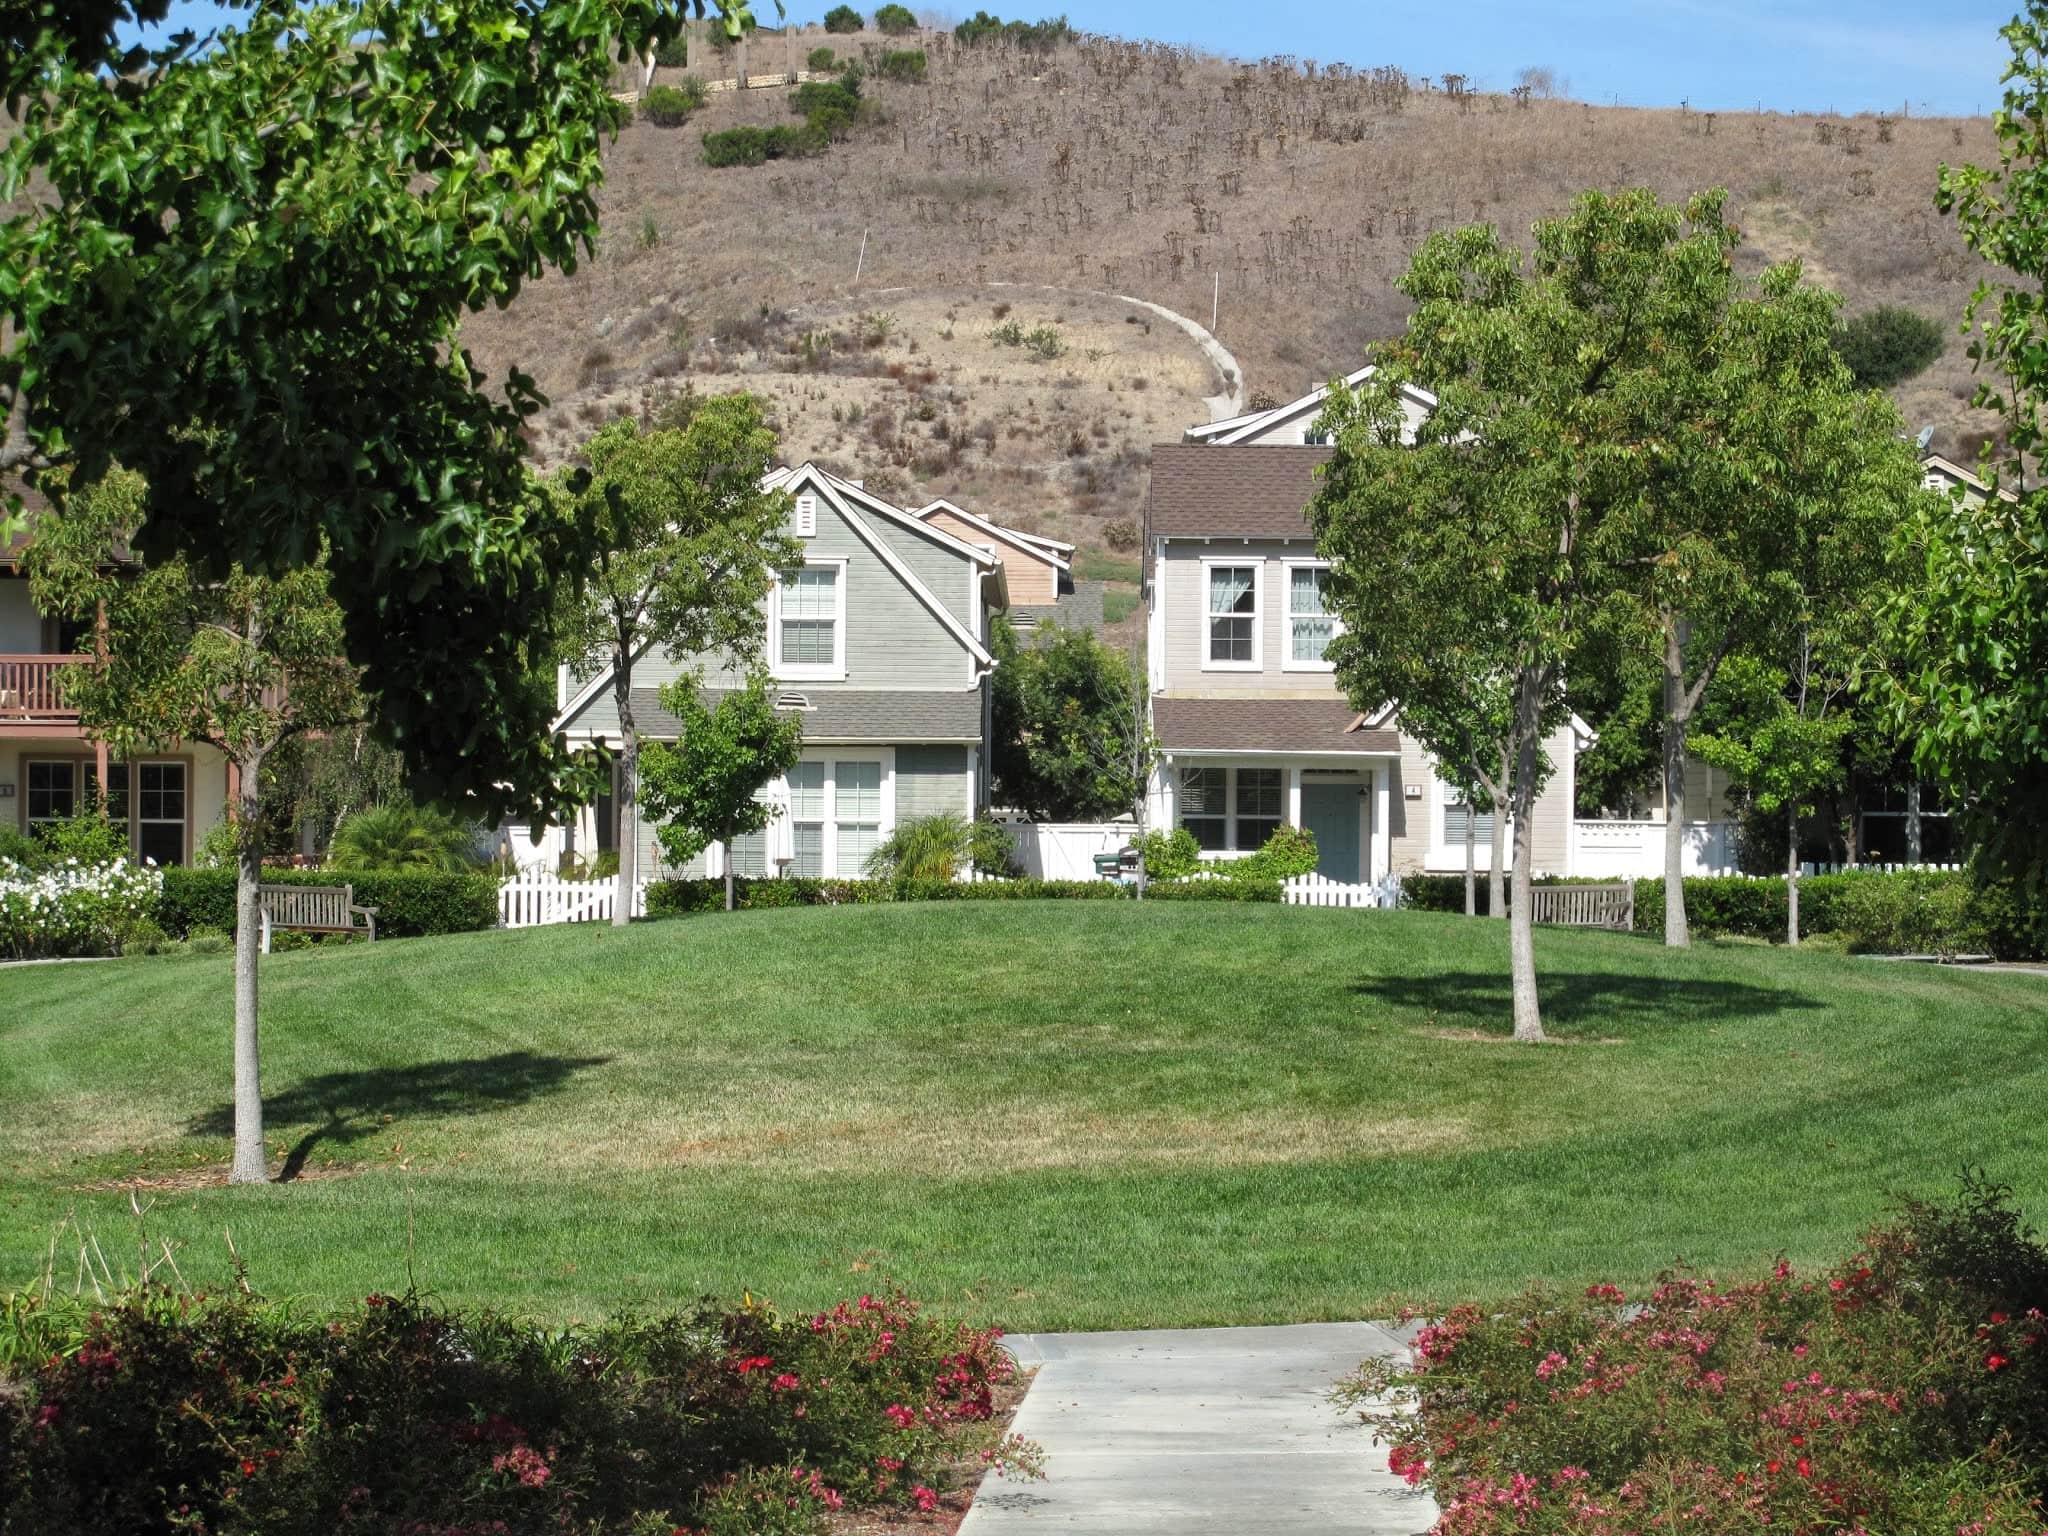 Ladera Ranch Real Estate, US, land for sale near me